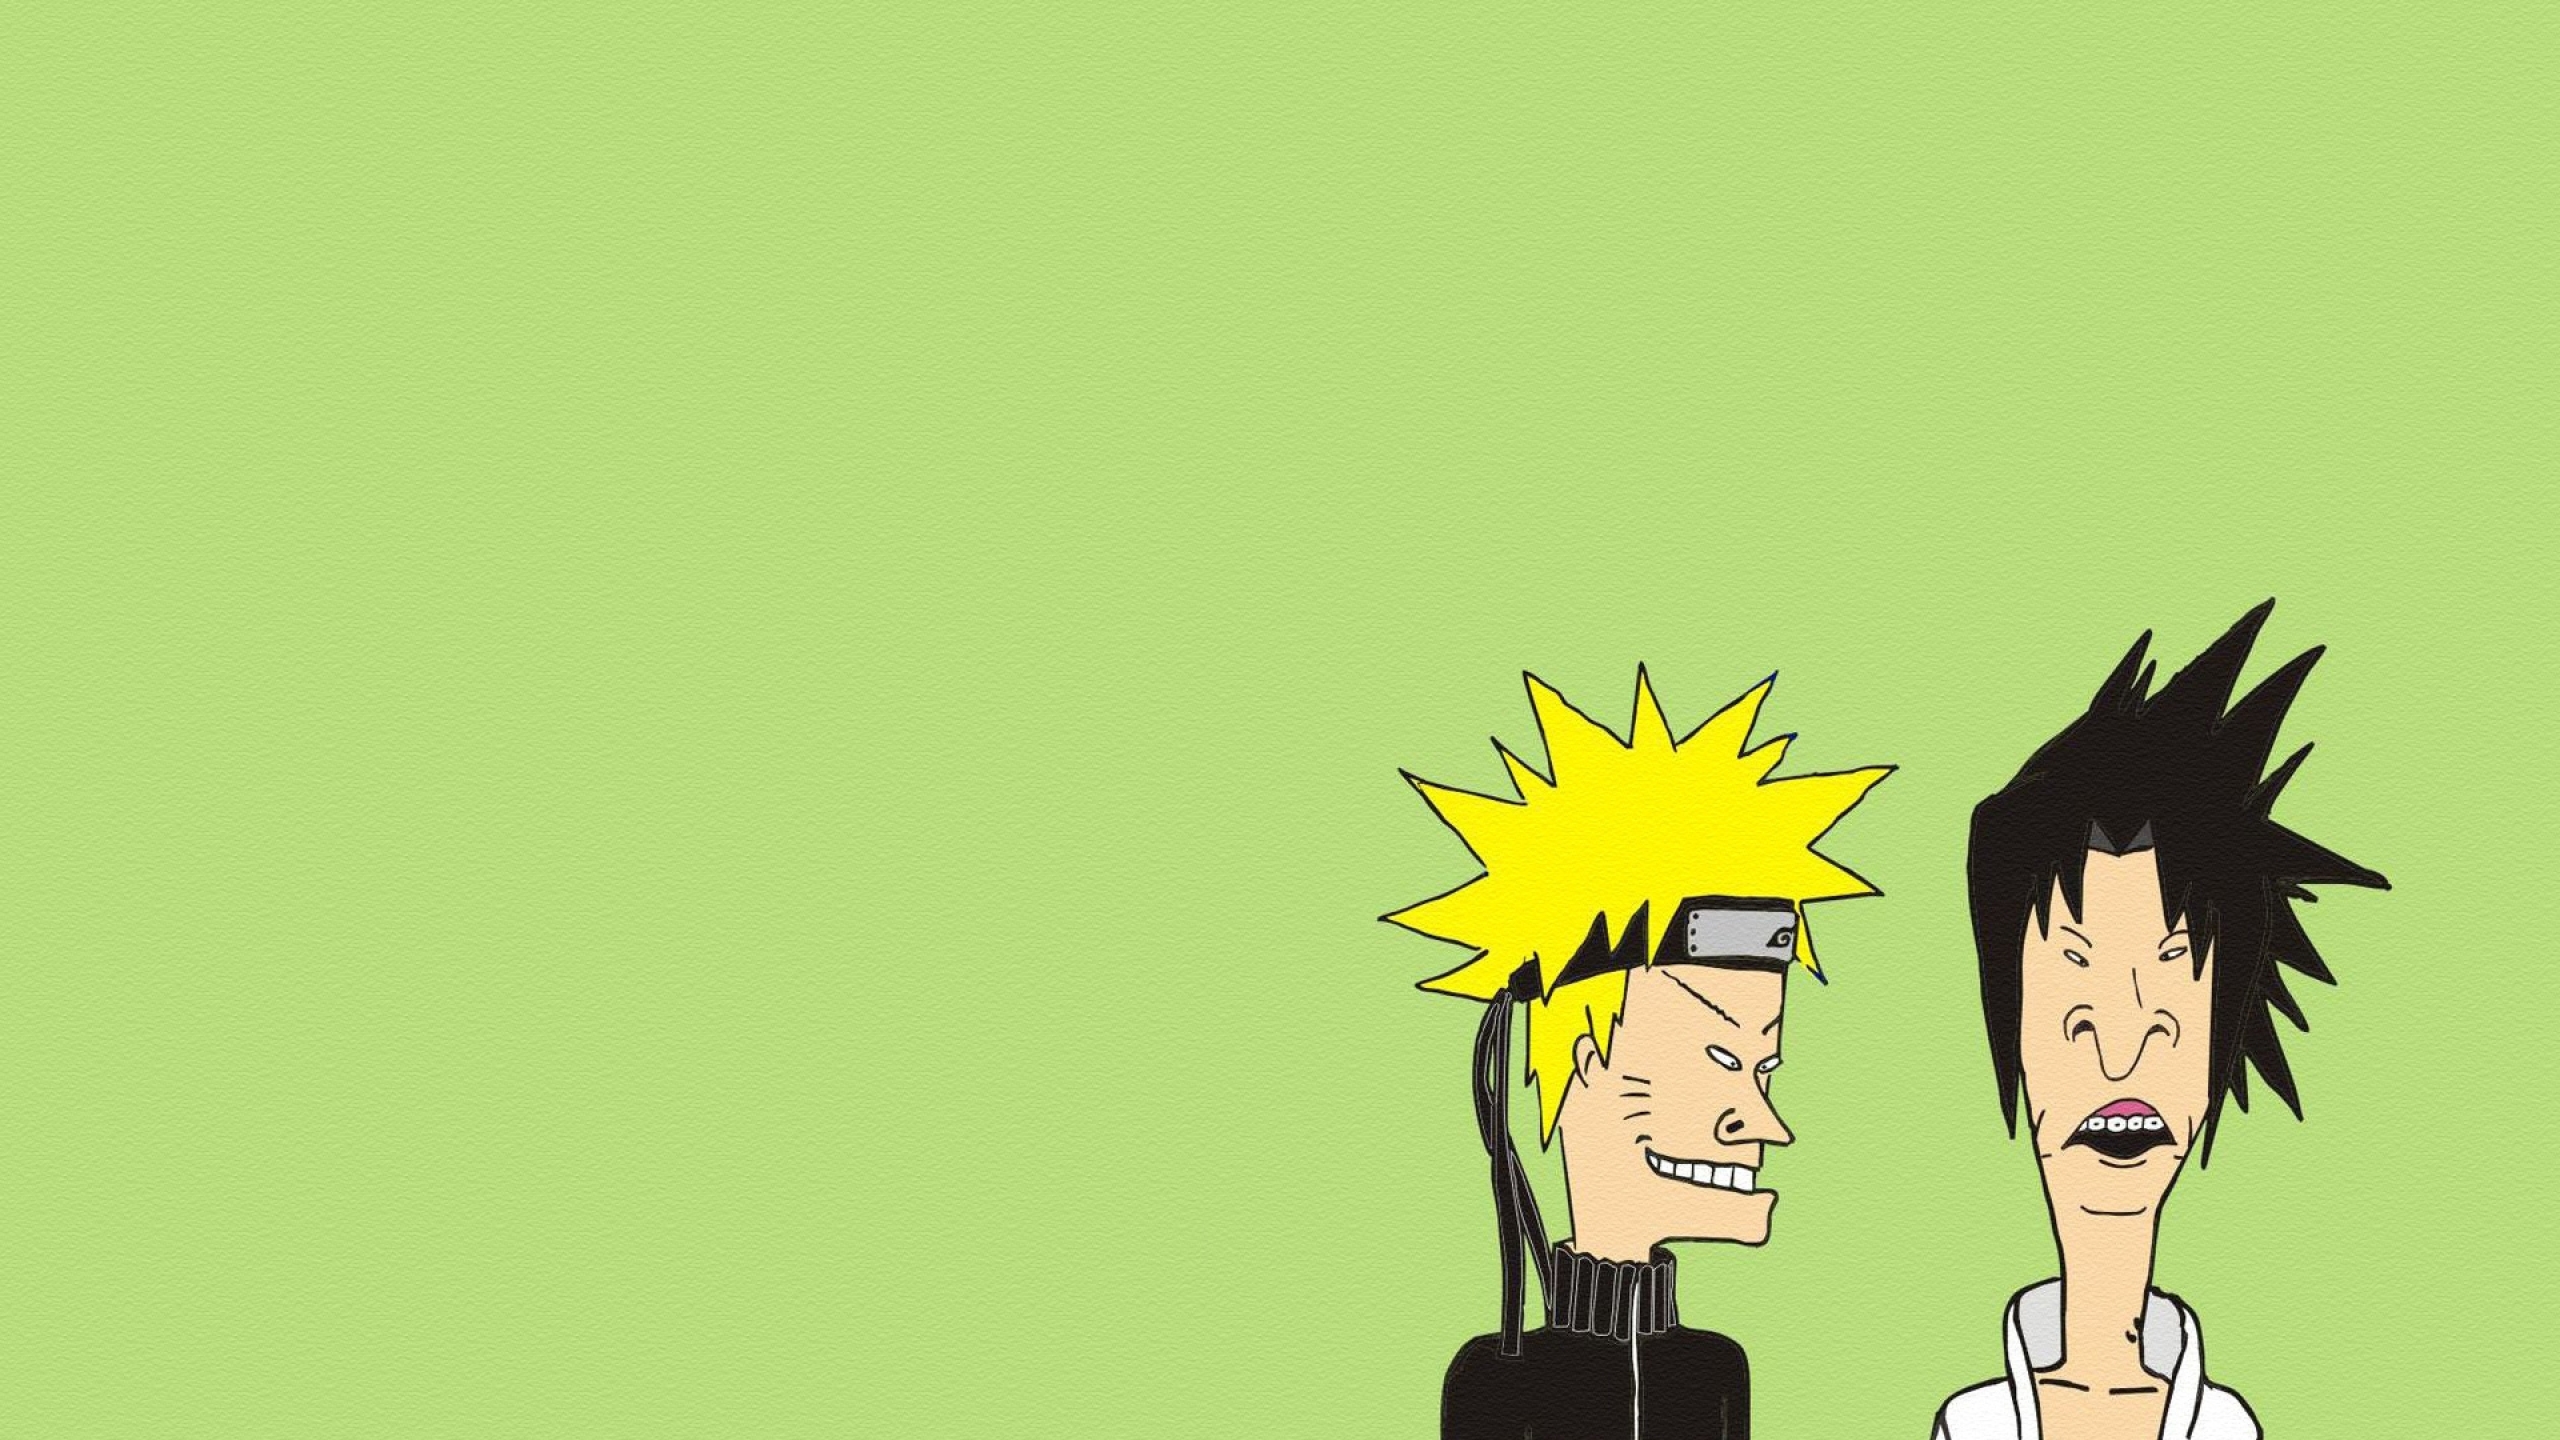 2560x1440 Naruto Beavis And Butt Head Minimalism 1440p Resolution Wallpaper Hd Vector 4k Wallpapers Images Photos And Background Wallpapers Den